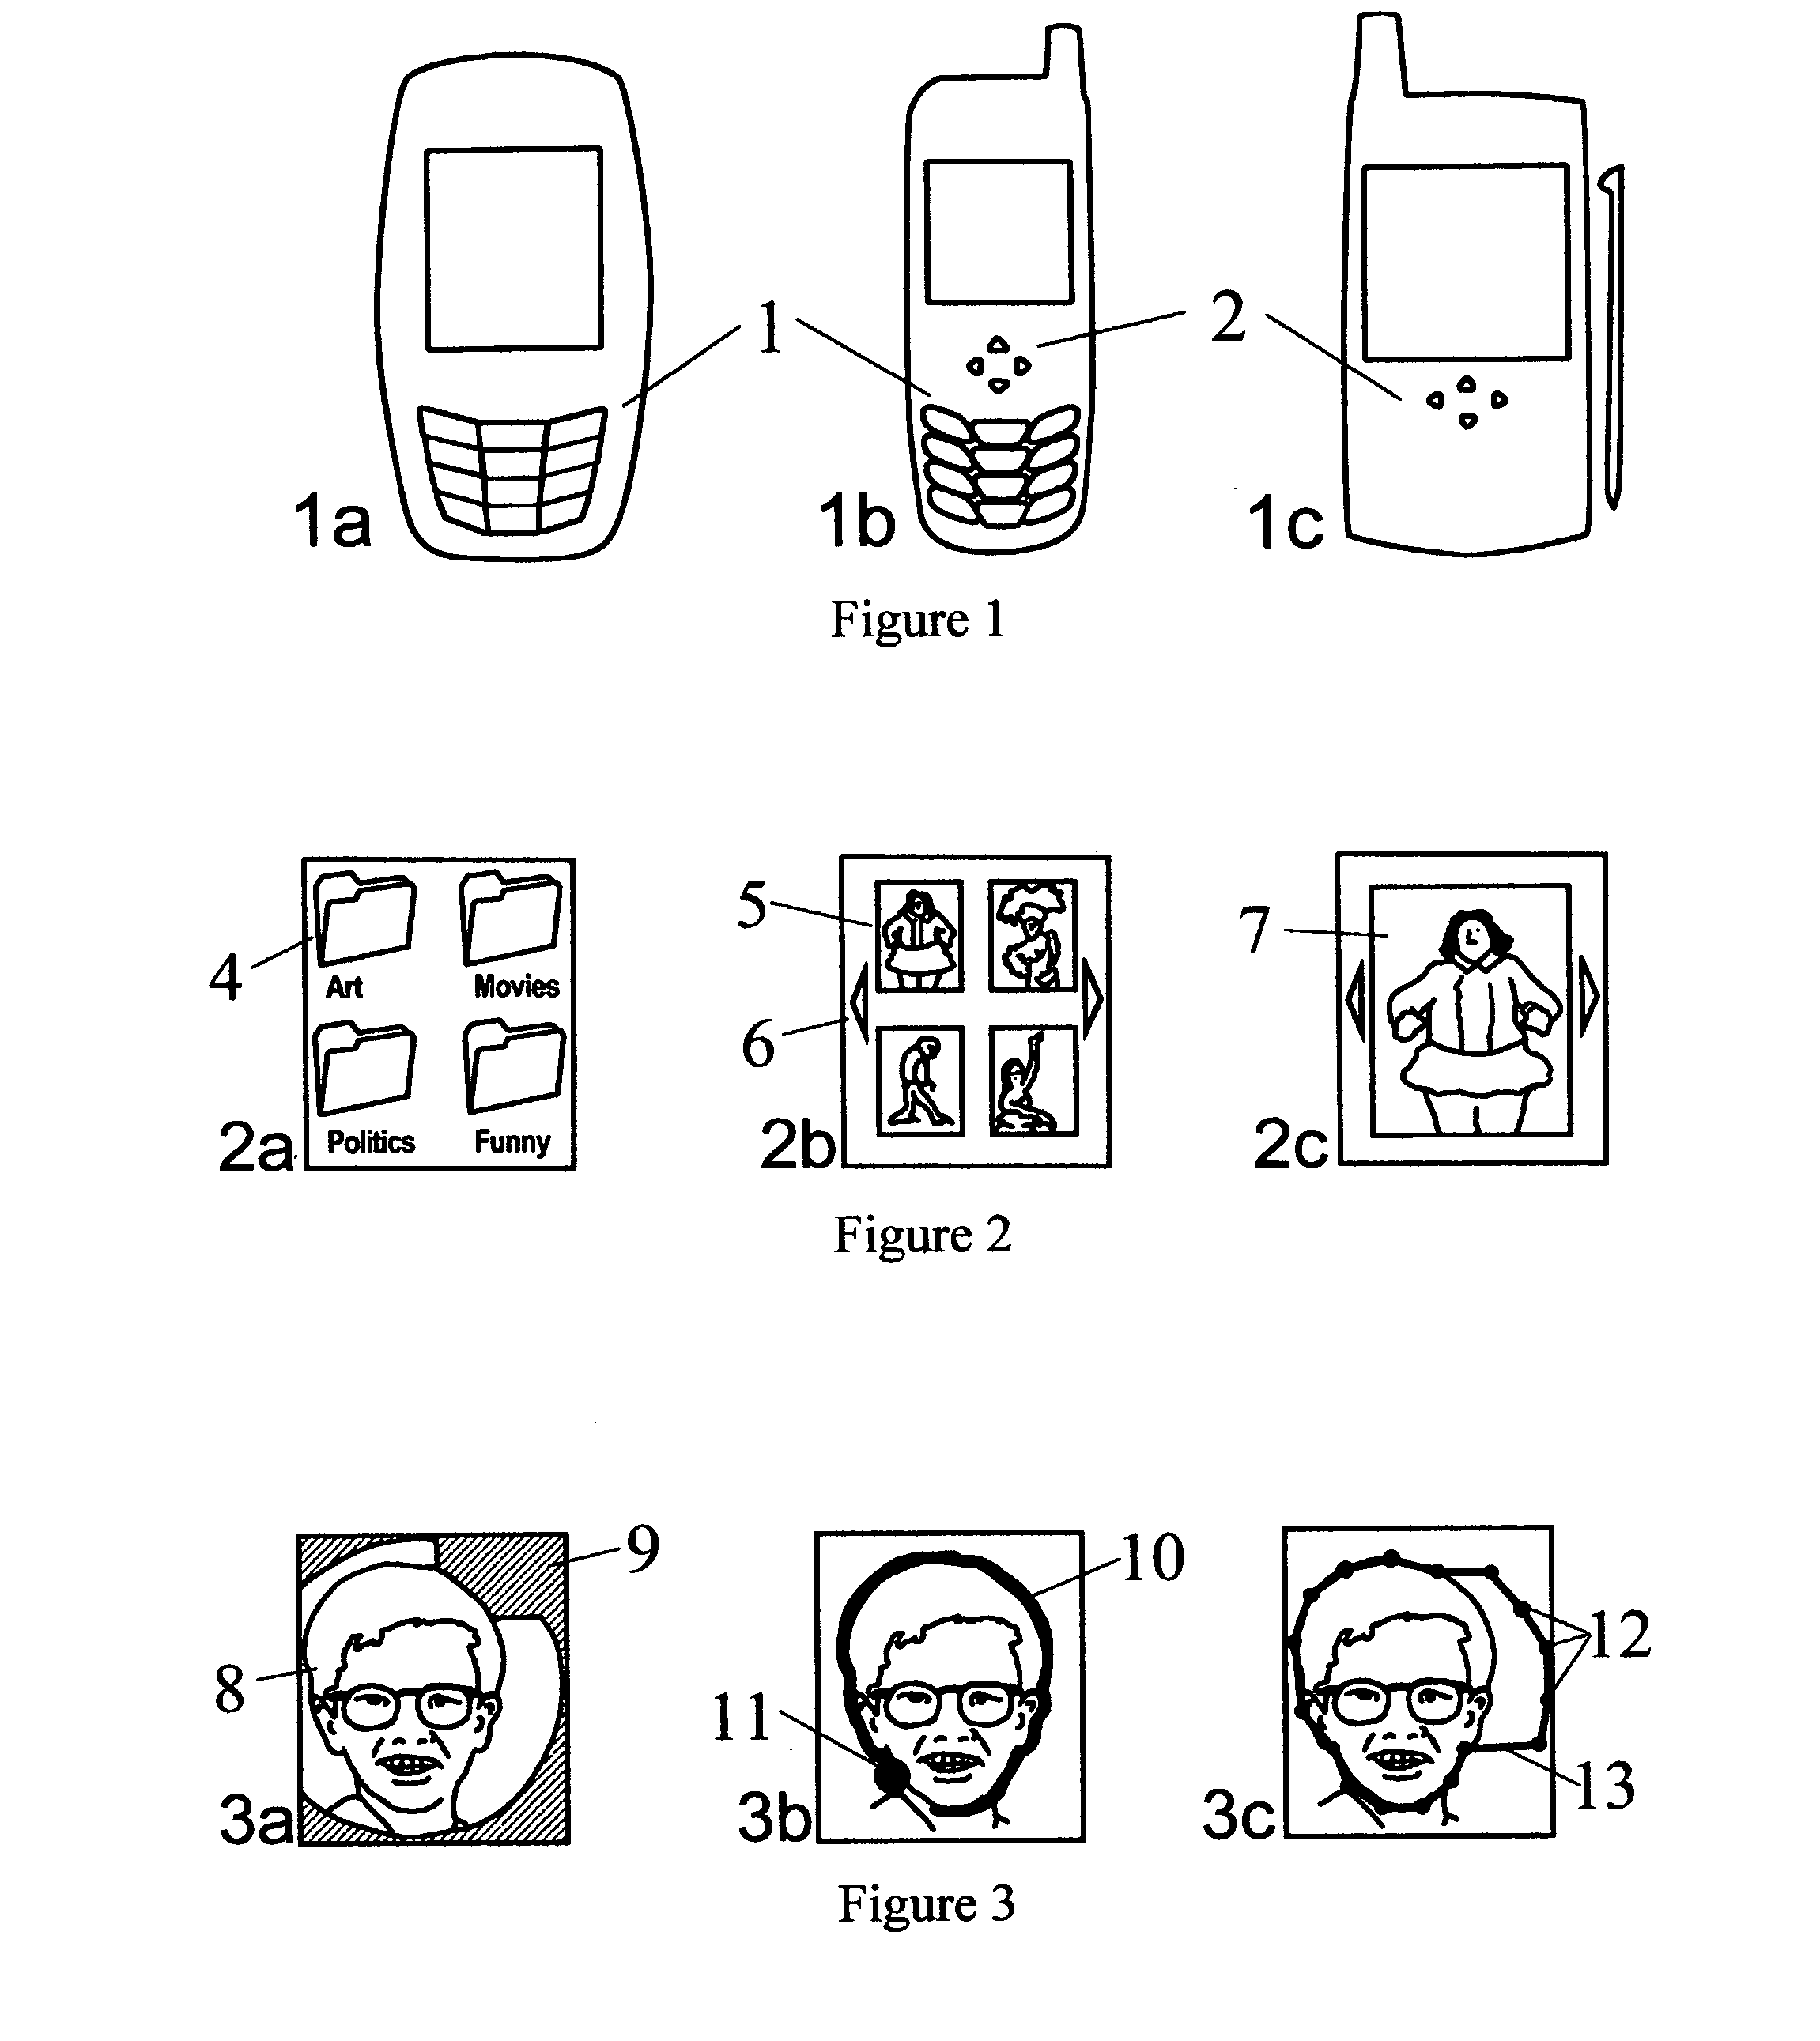 System for superimposing a face image on a body image